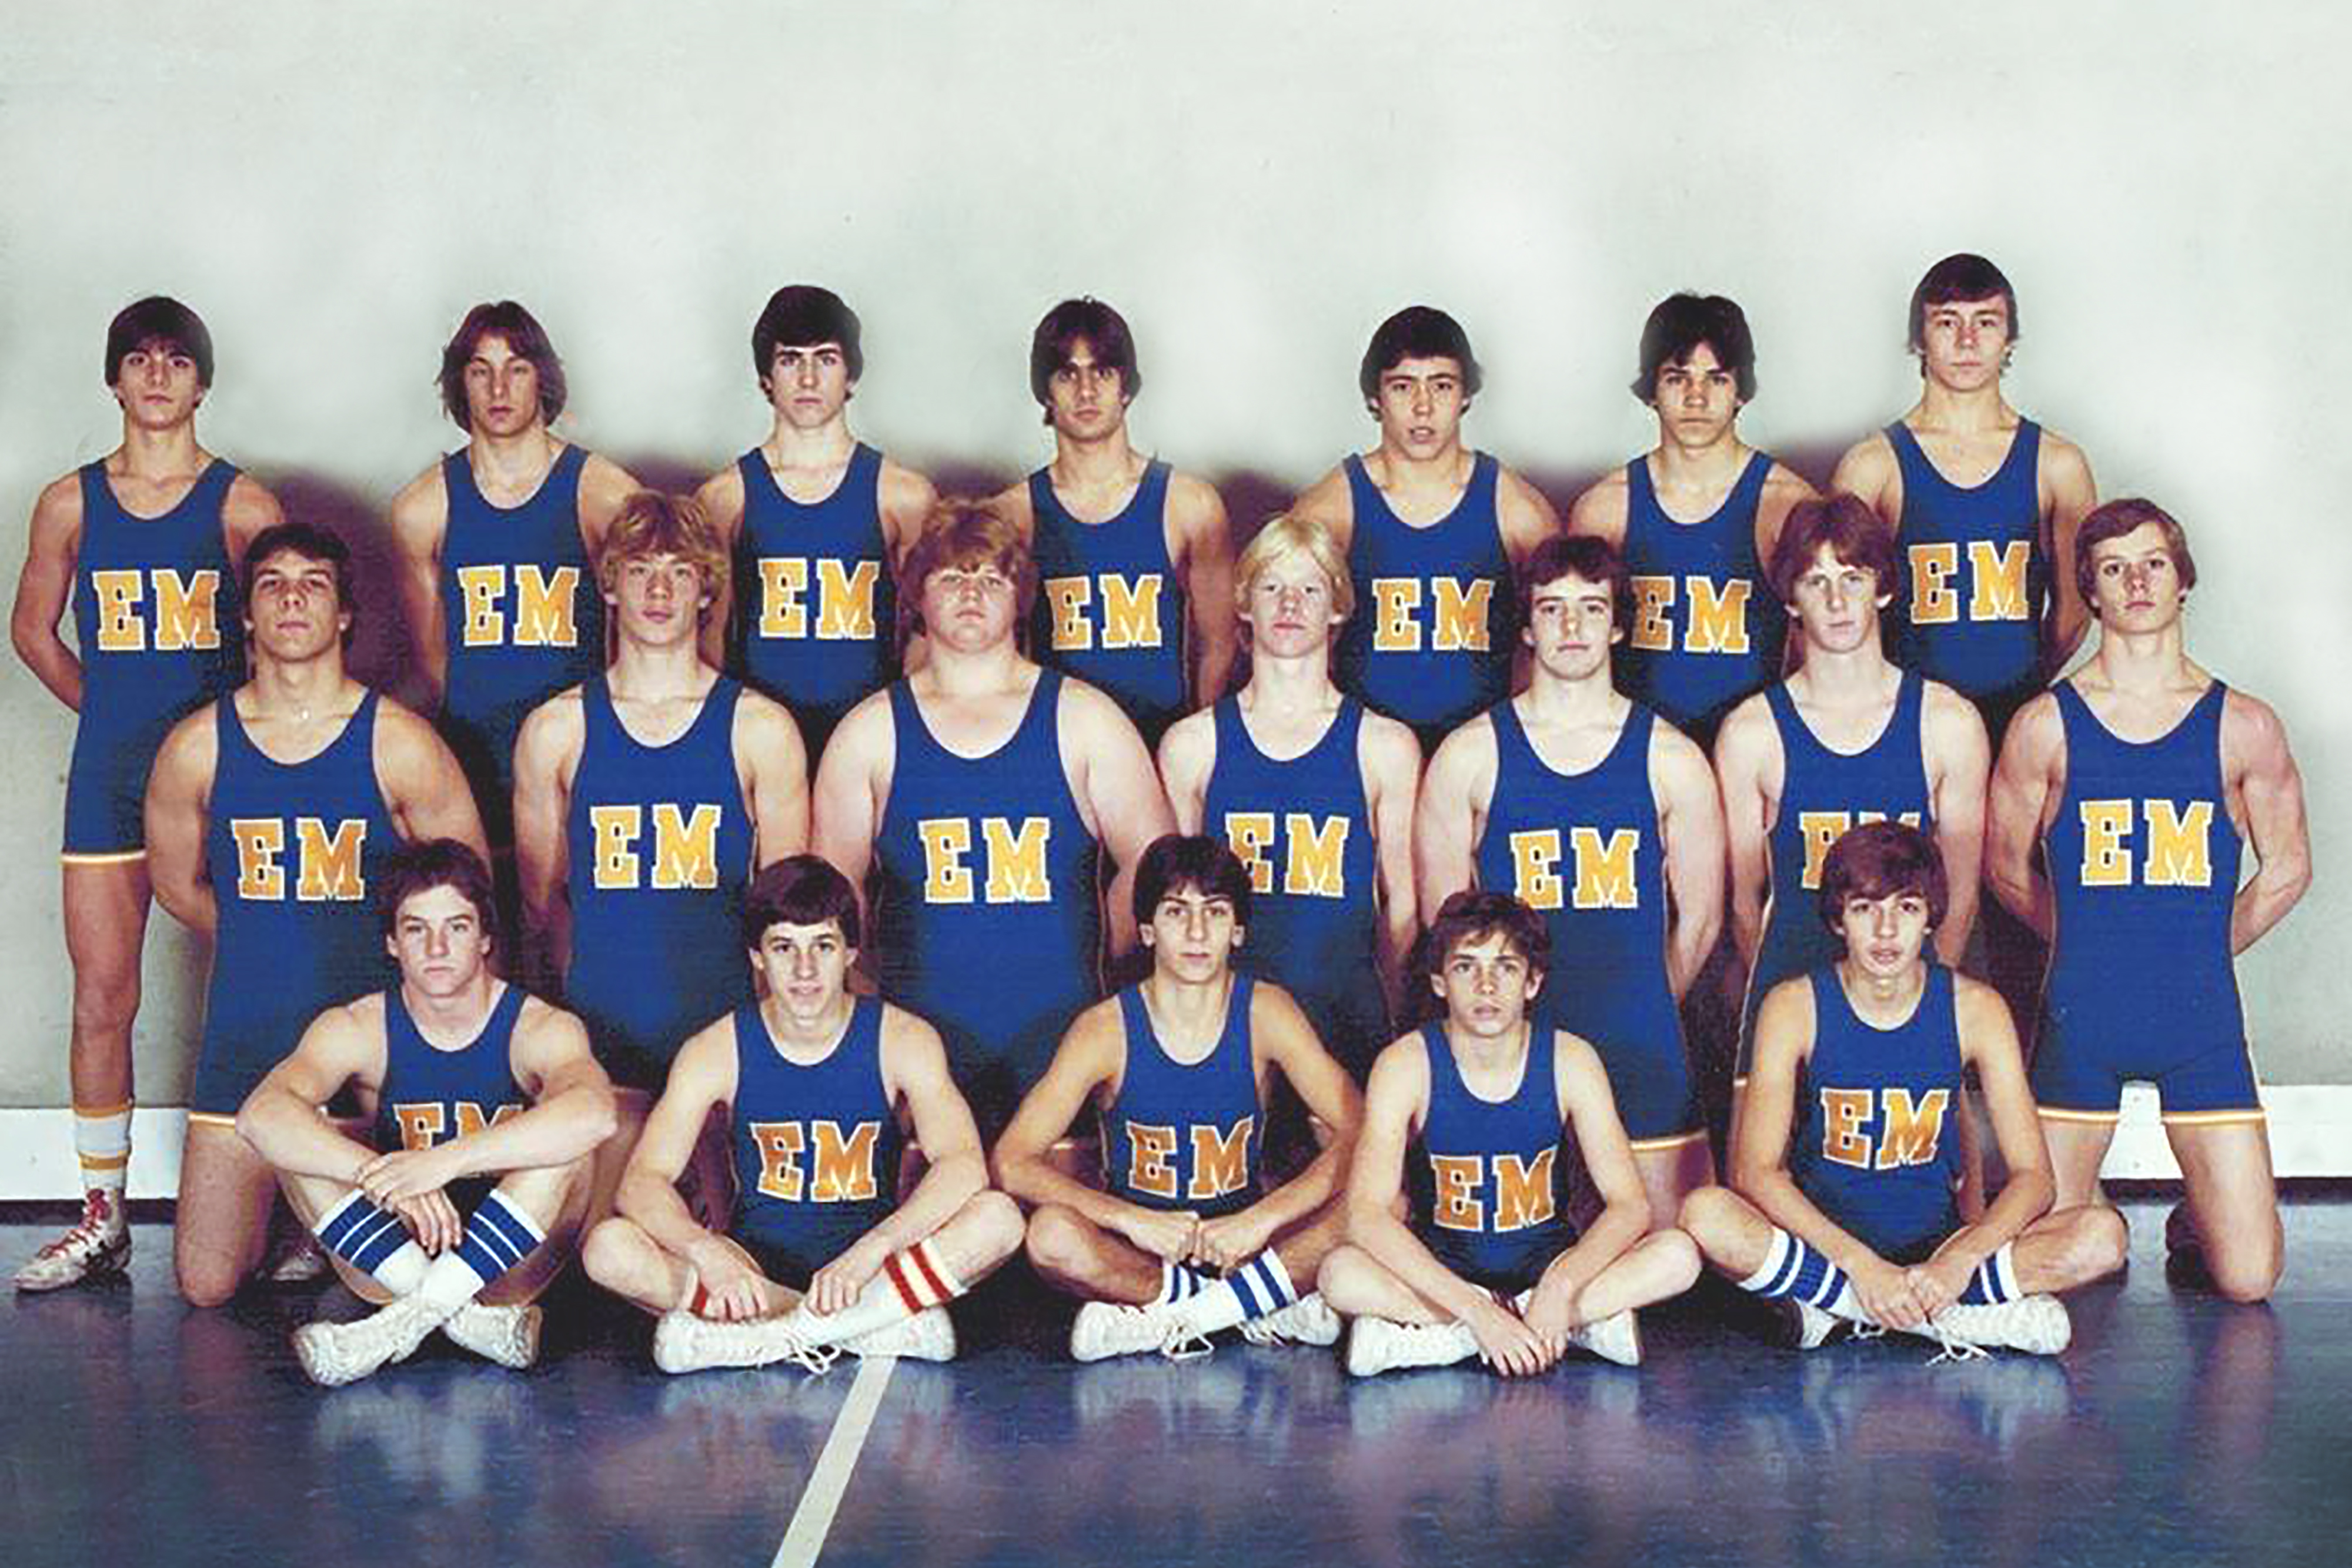 Second row far right corner - 1980 East Meadow High School Varsity Wrestling team, six years of wrestling, 4 letter varsity scholar athlete. John Dowling has a history of being a scholar athlete since he started junior high school.